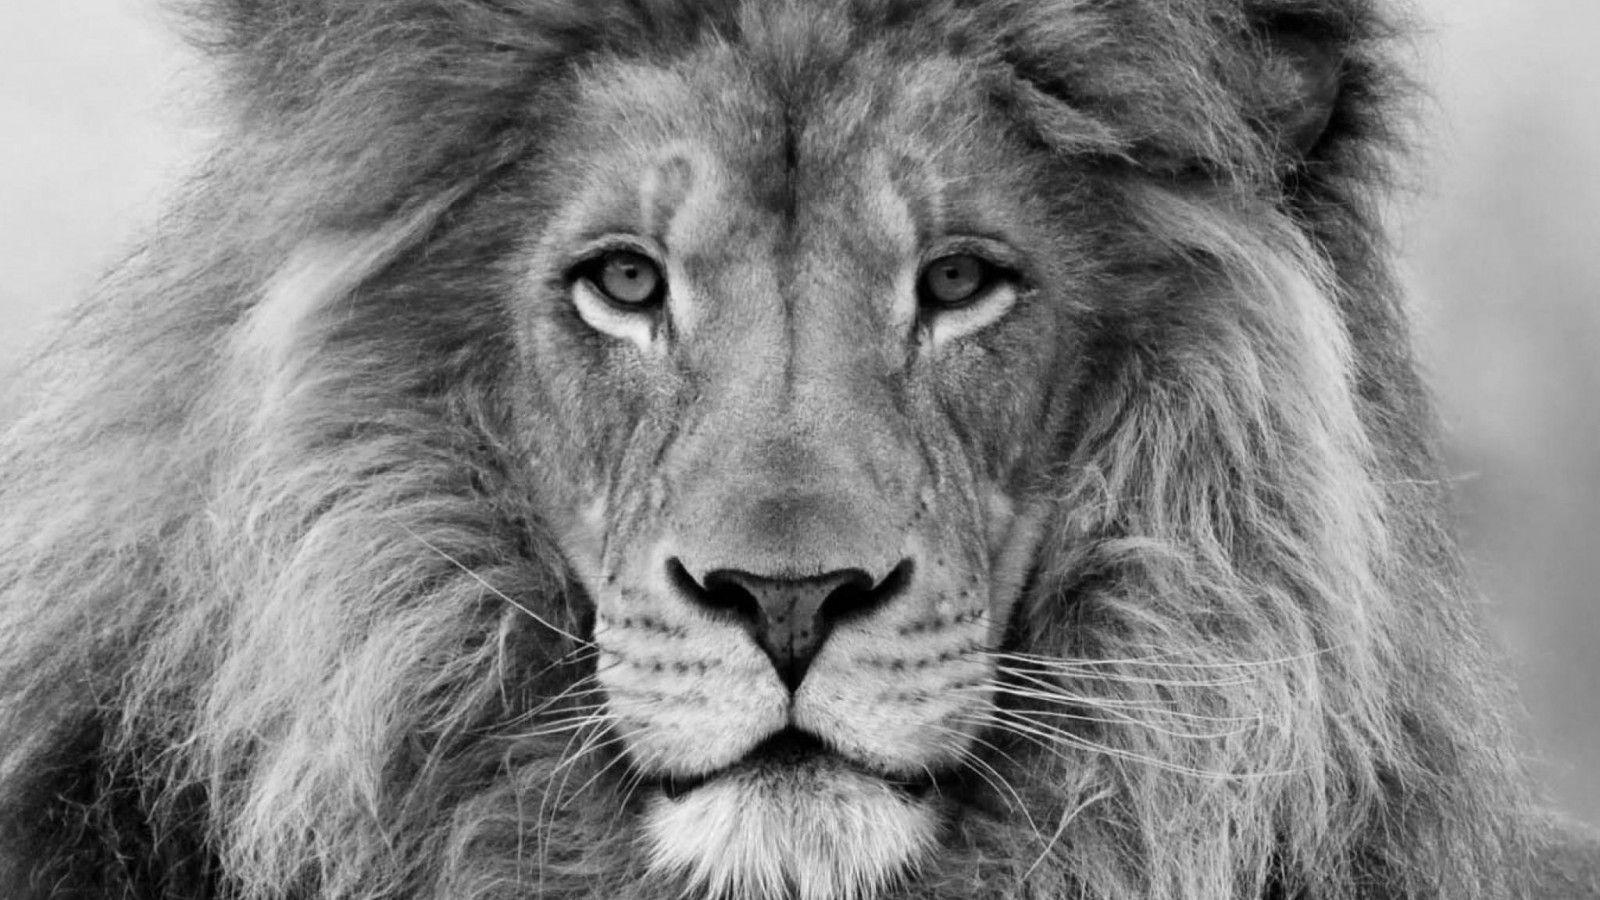 Black and White Lion Wallpapers - Top Free Black and White Lion